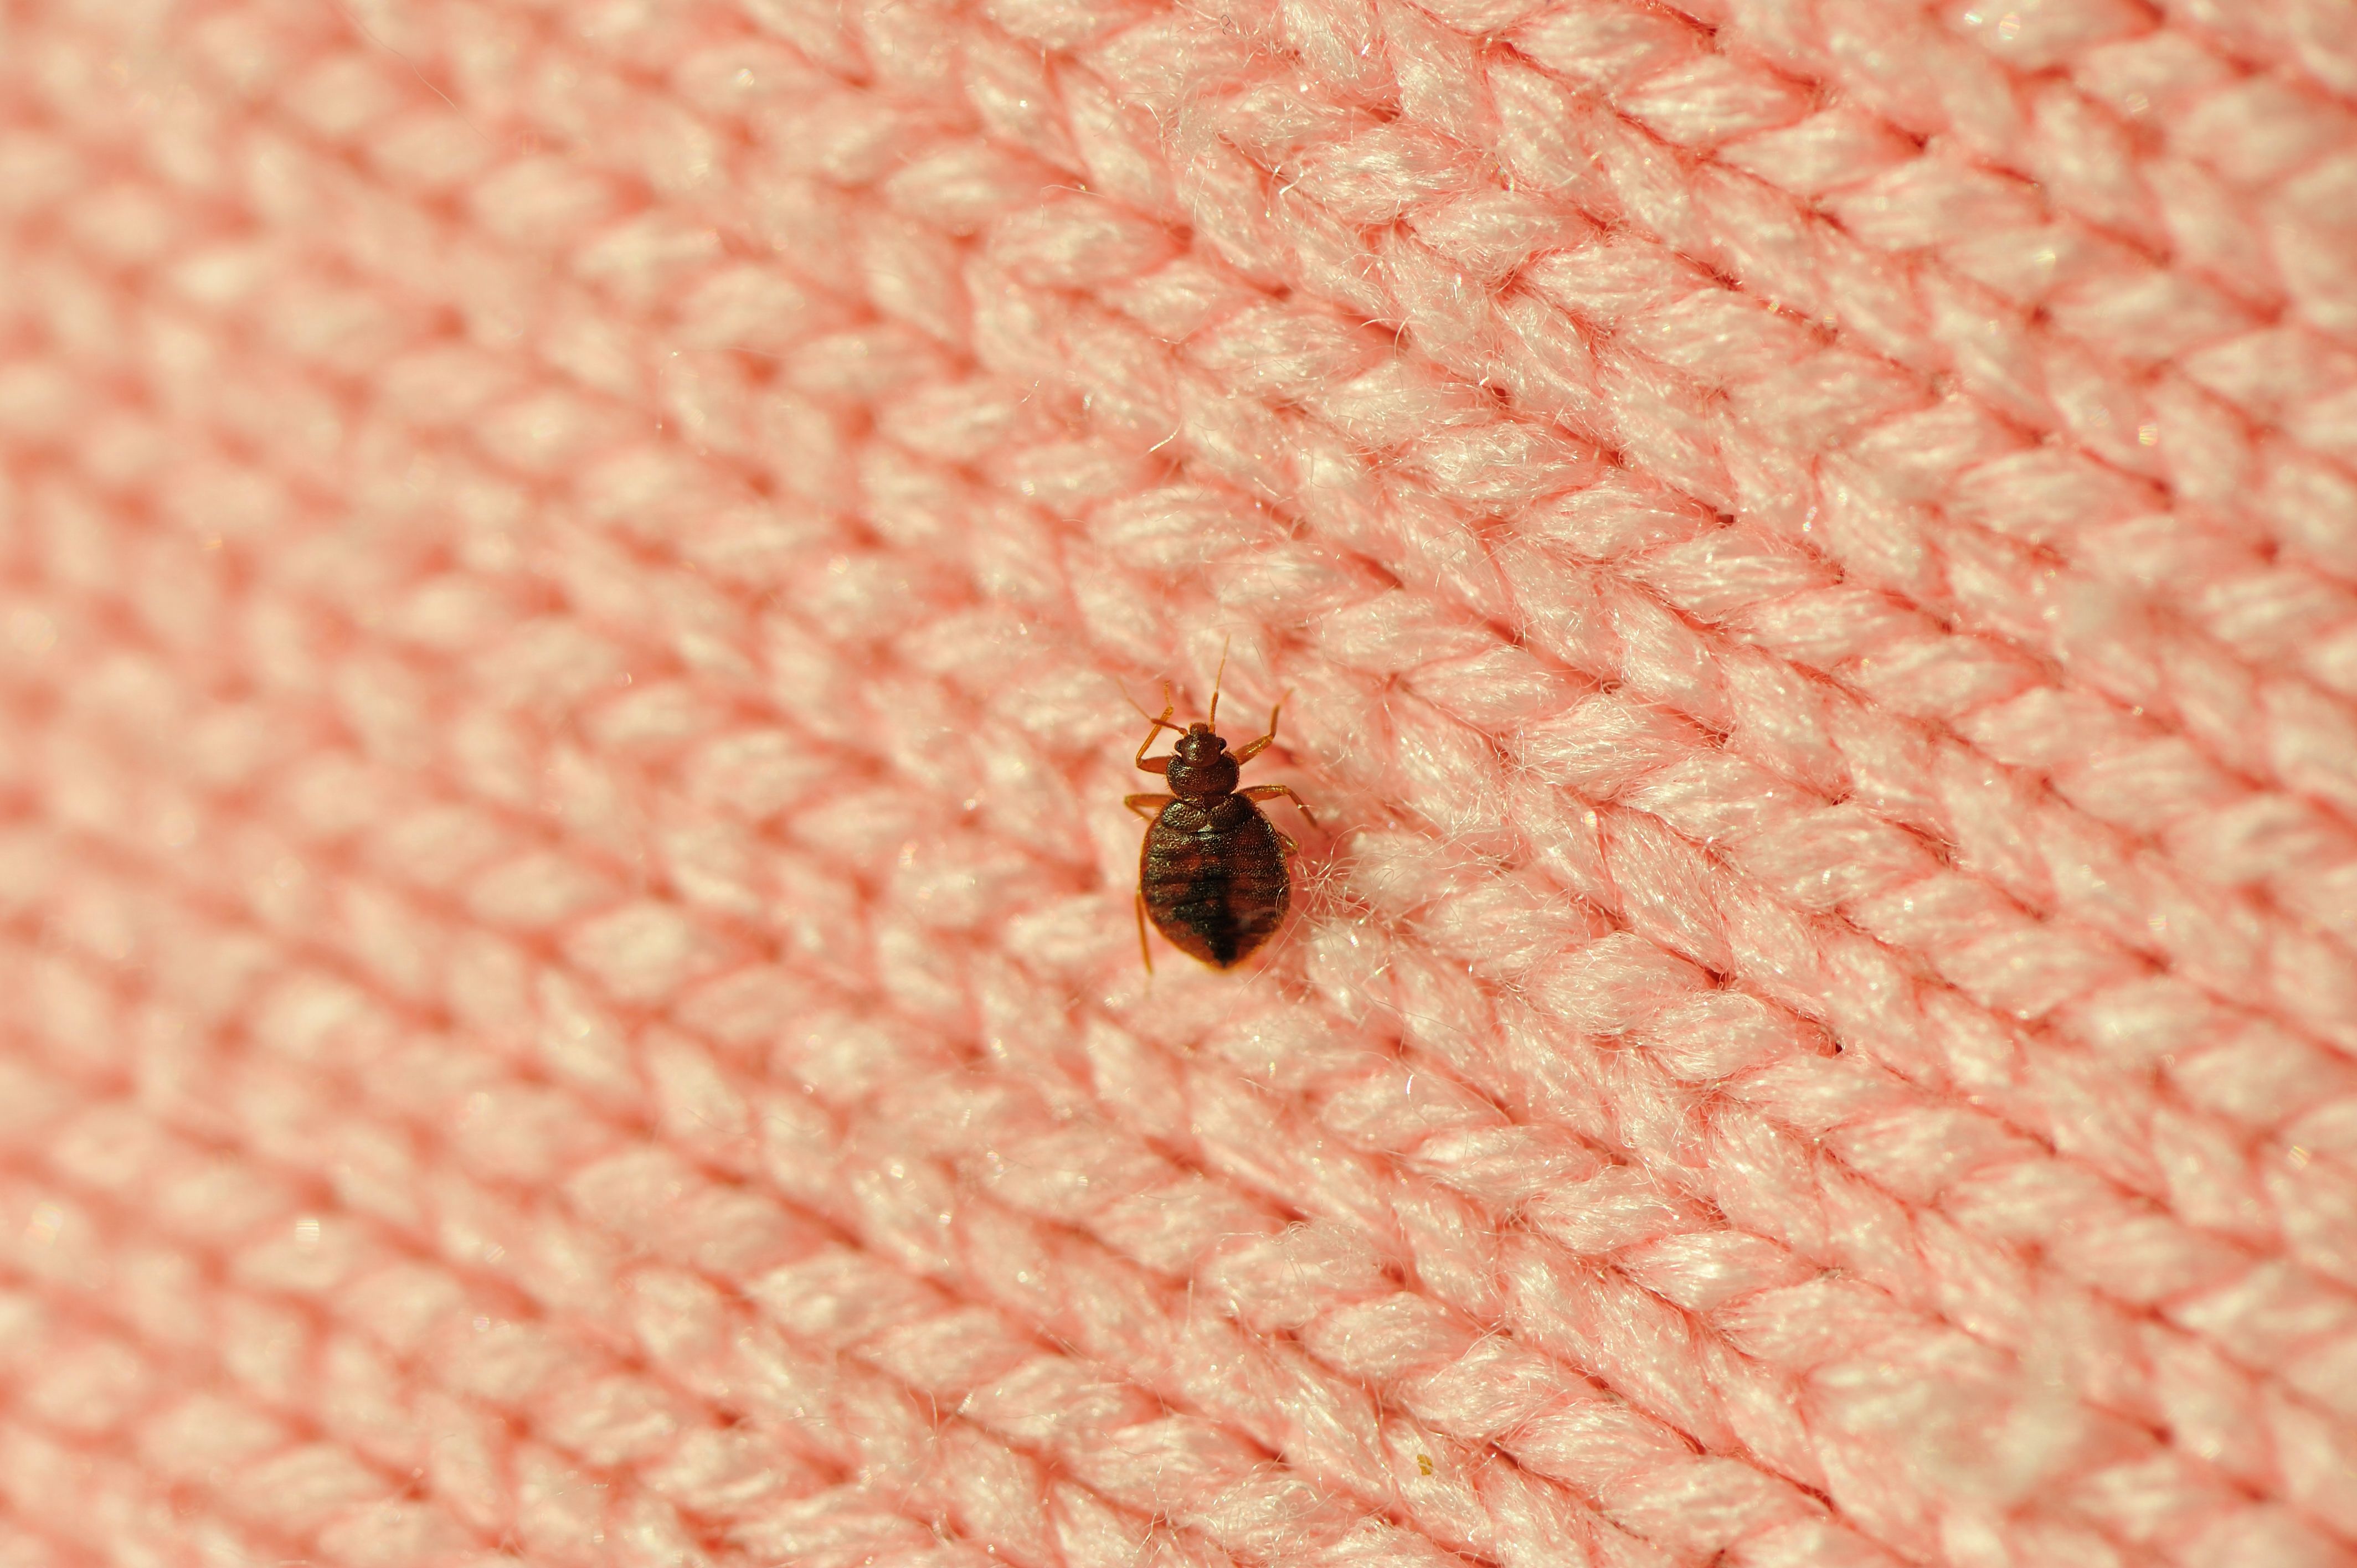 How to Prevent Bed Bugs With 3 Items From Experts